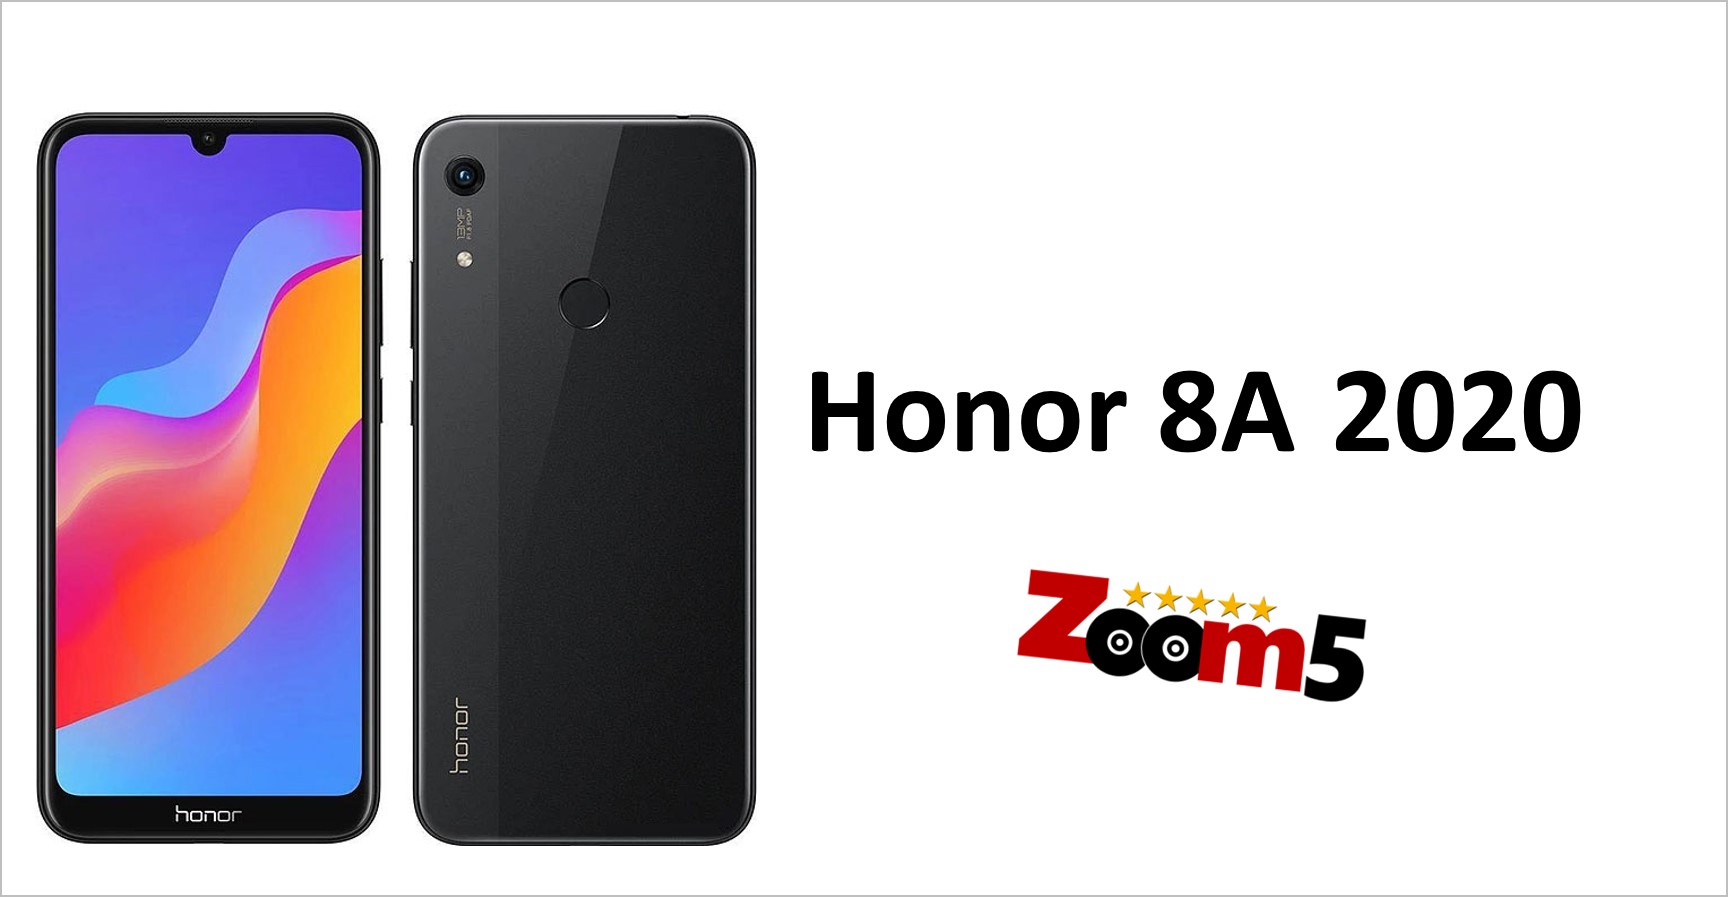 2020 Honor 8A